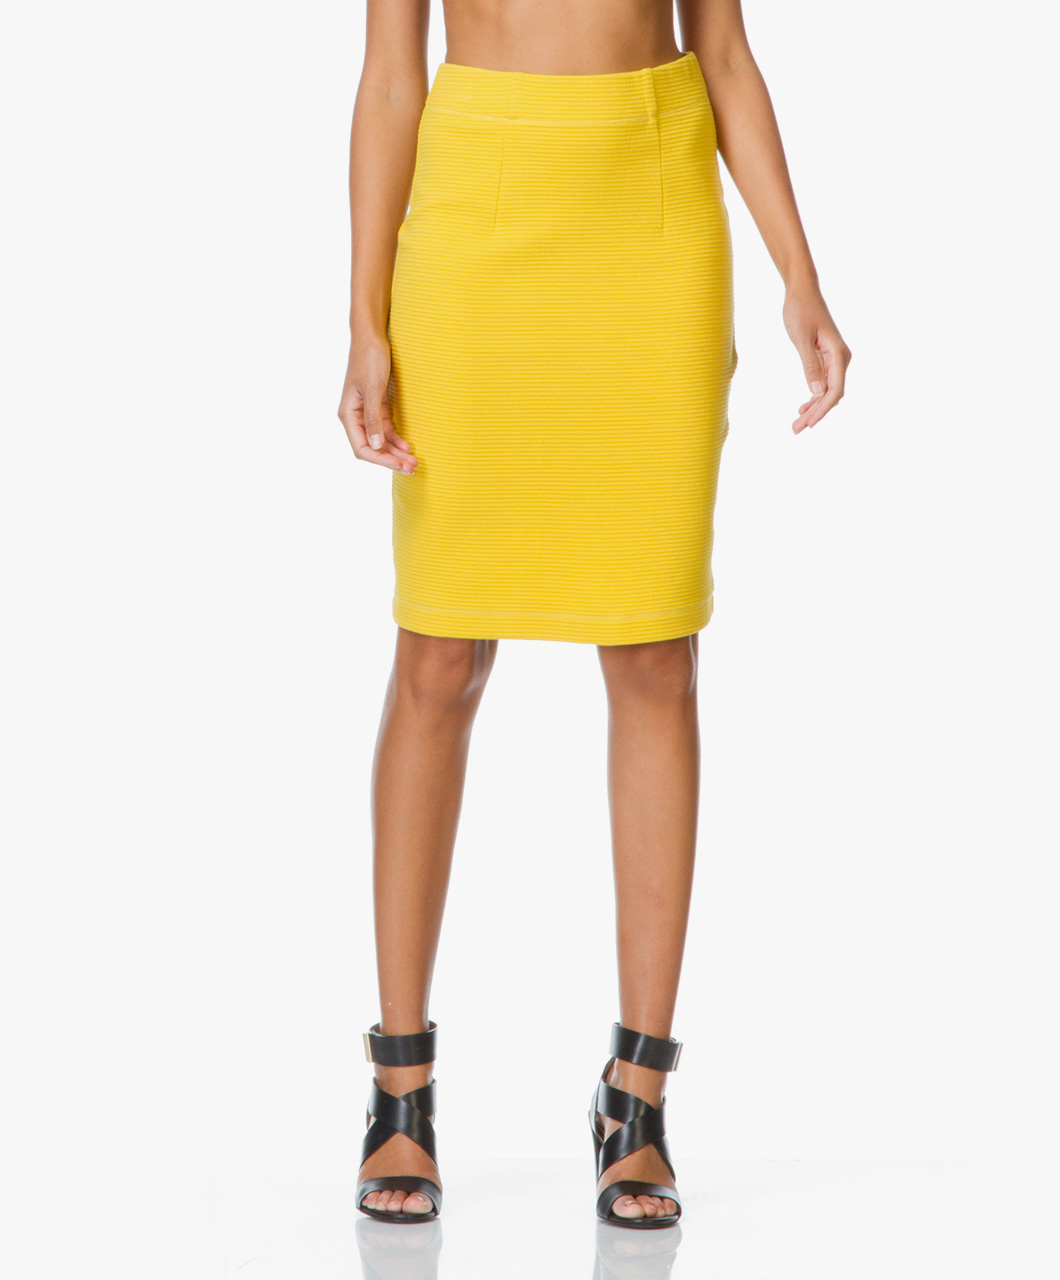 Shop the look - Easy-chic in trendcolour yellow | Perfectly Basics